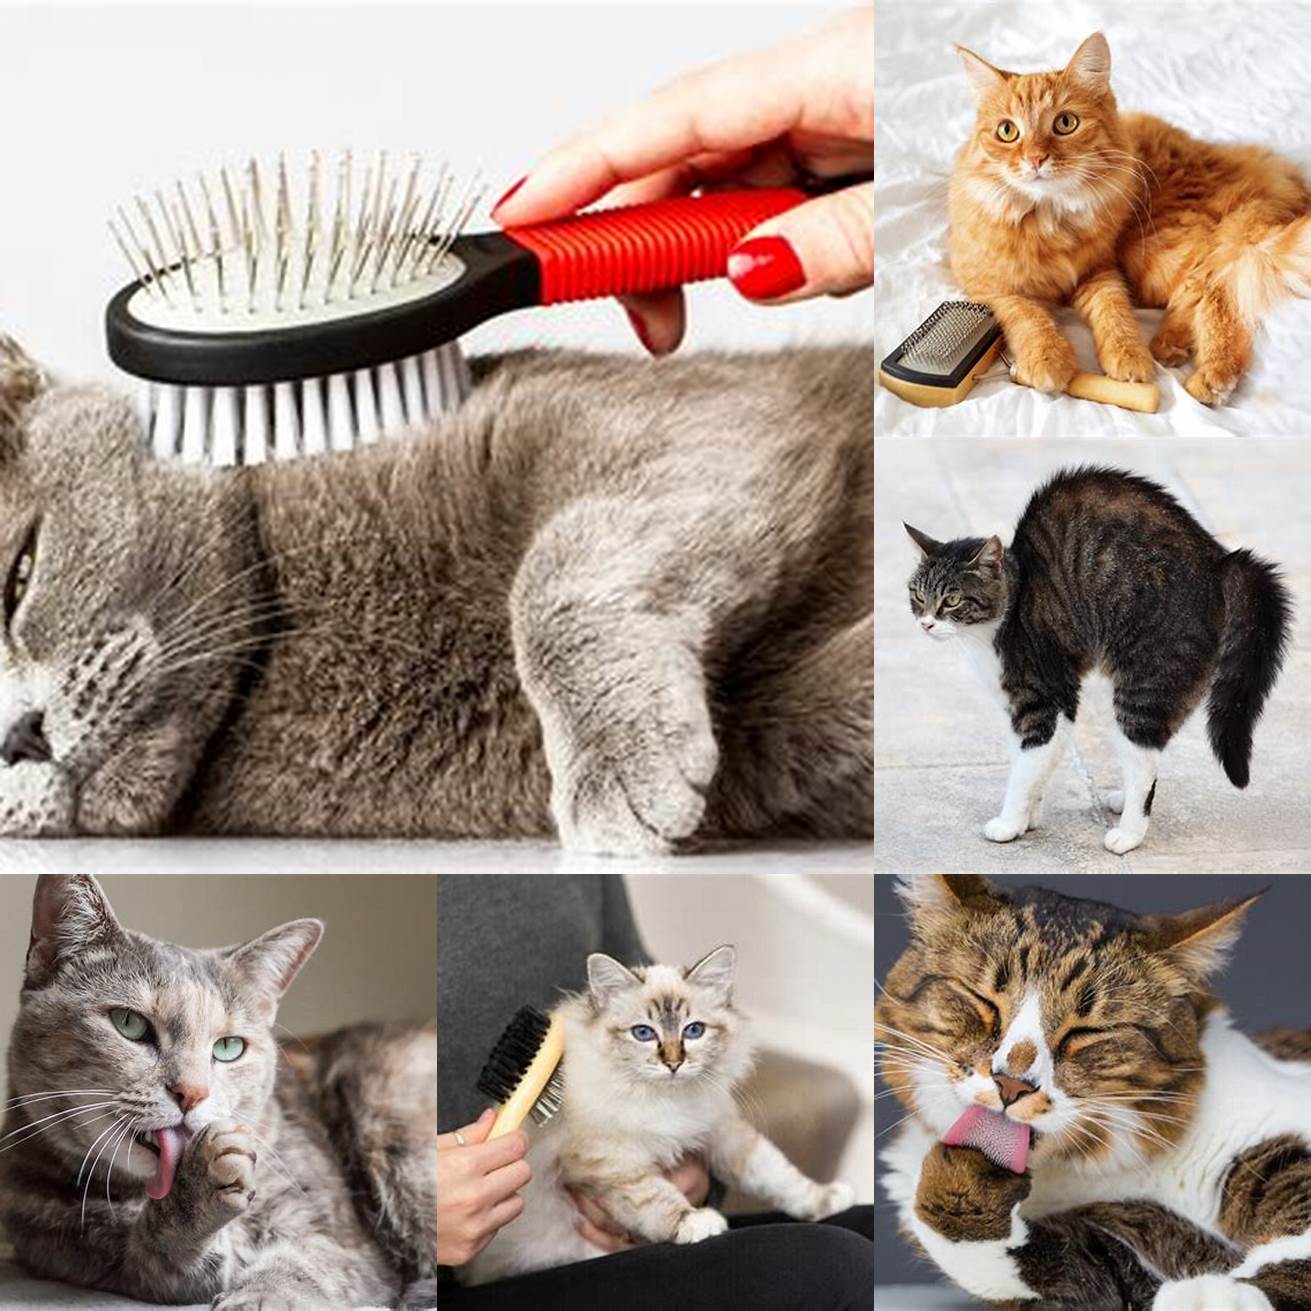 Cat grooming their tail